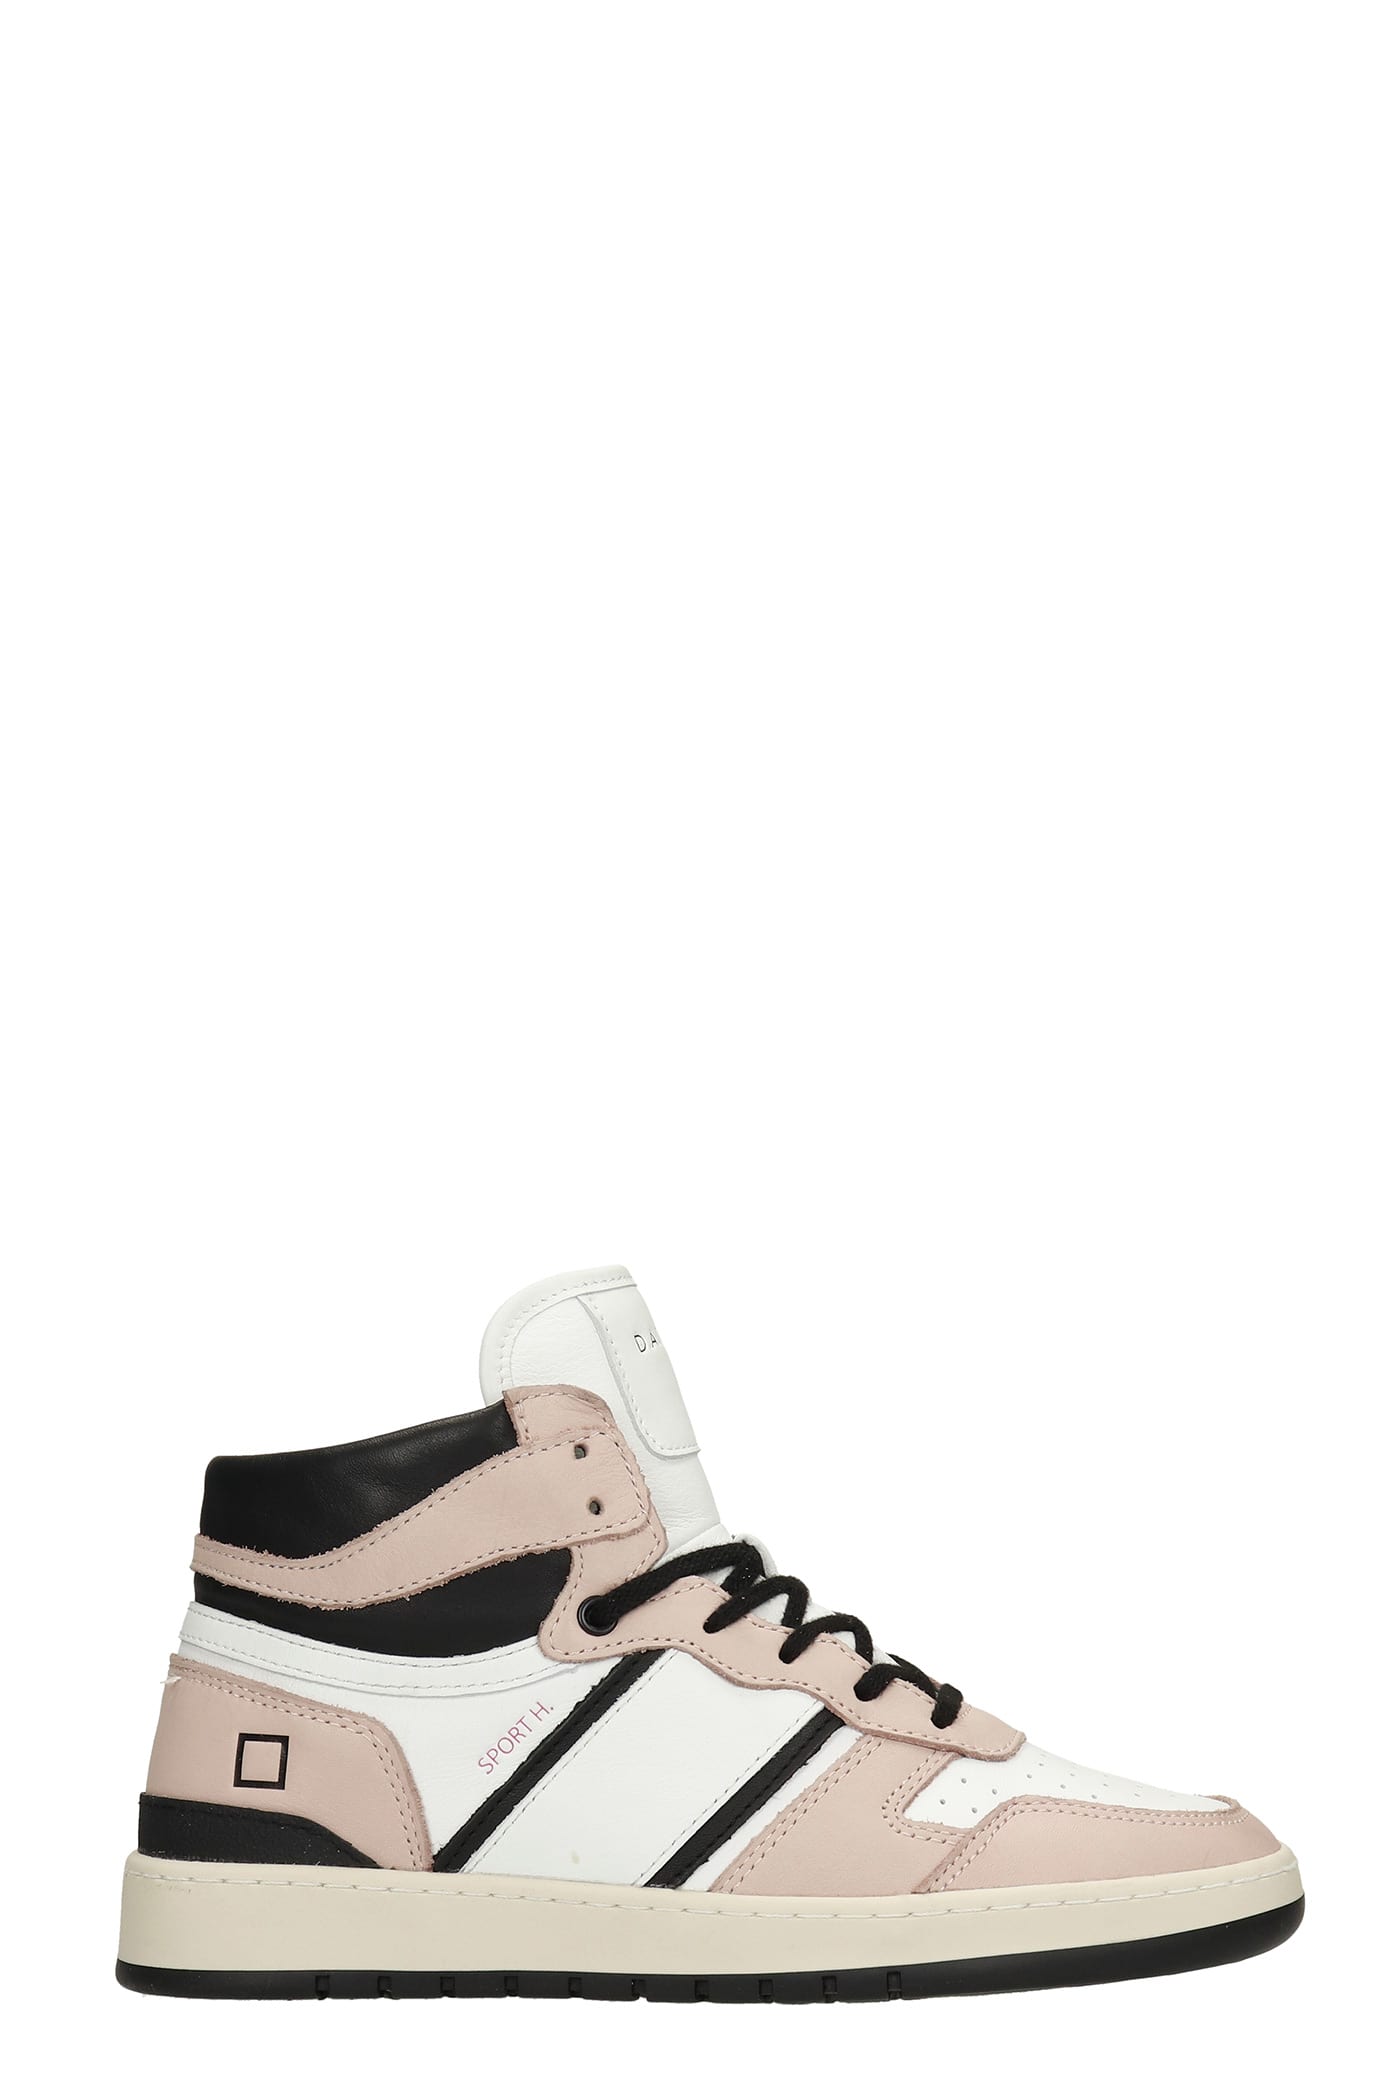 D.A.T.E. Sport Sneakers In White Leather